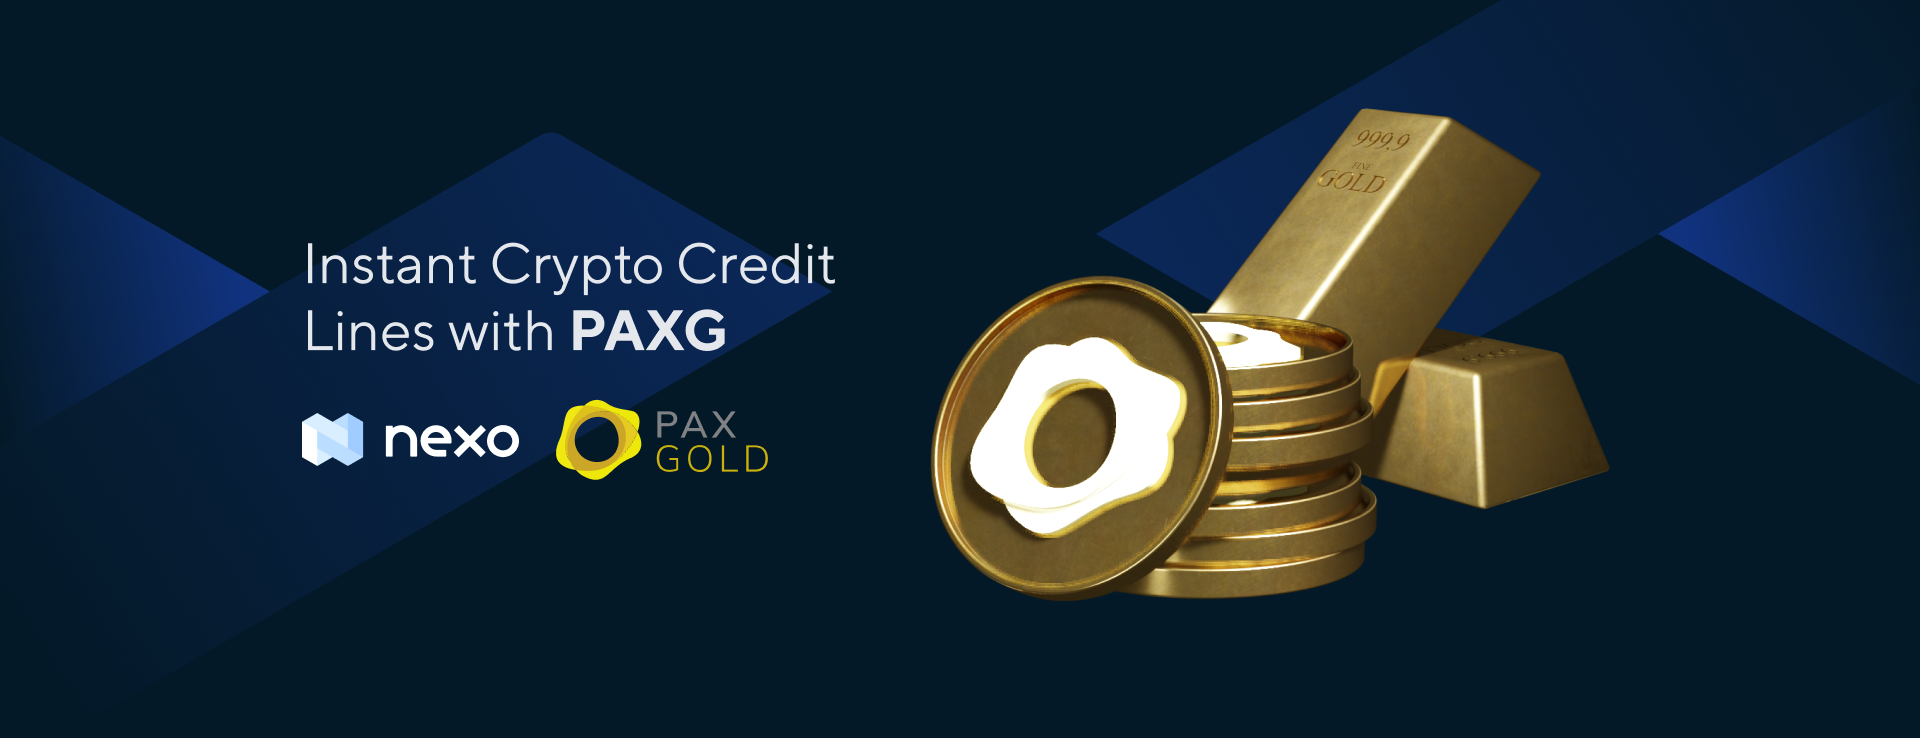 PAXG Instant Crypto Credit Line Now Available for Retail Clients